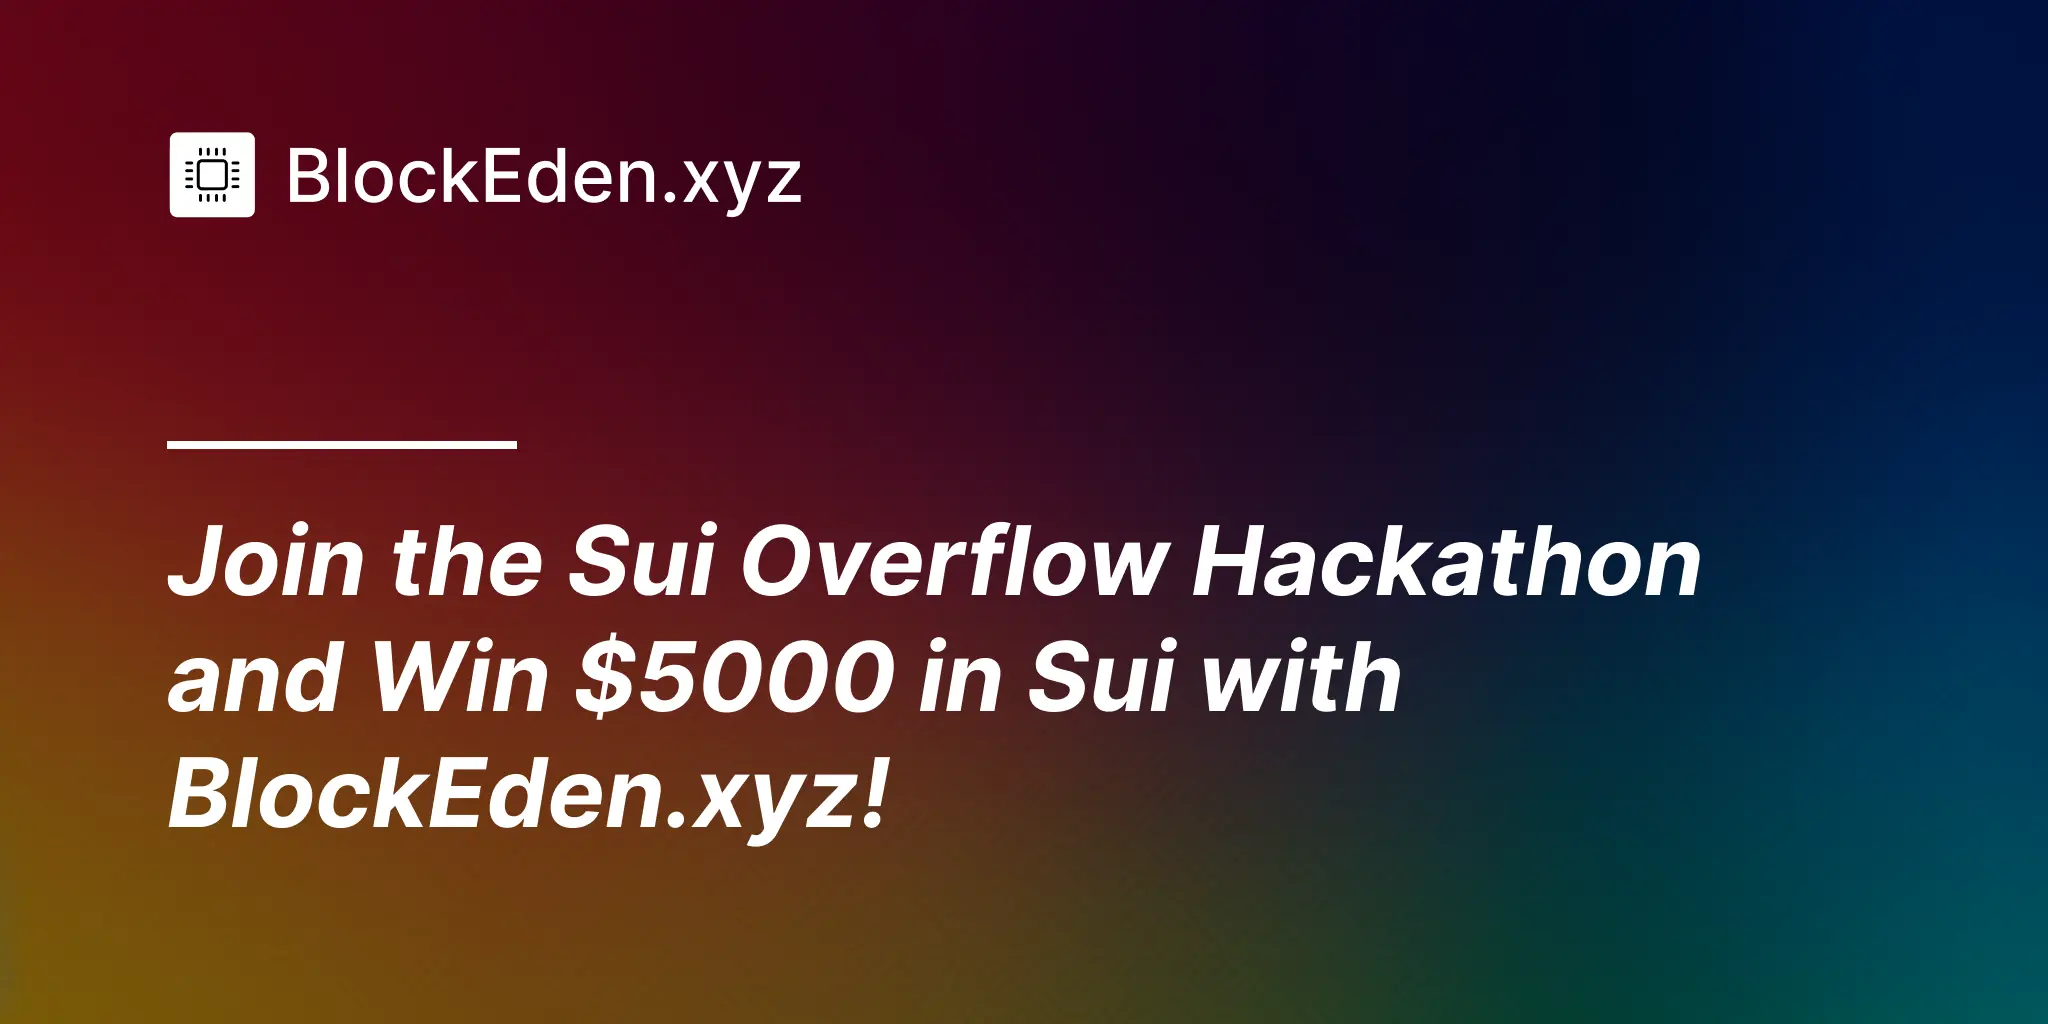 Join the Sui Overflow Hackathon and Win $5000 in Sui with BlockEden.xyz!